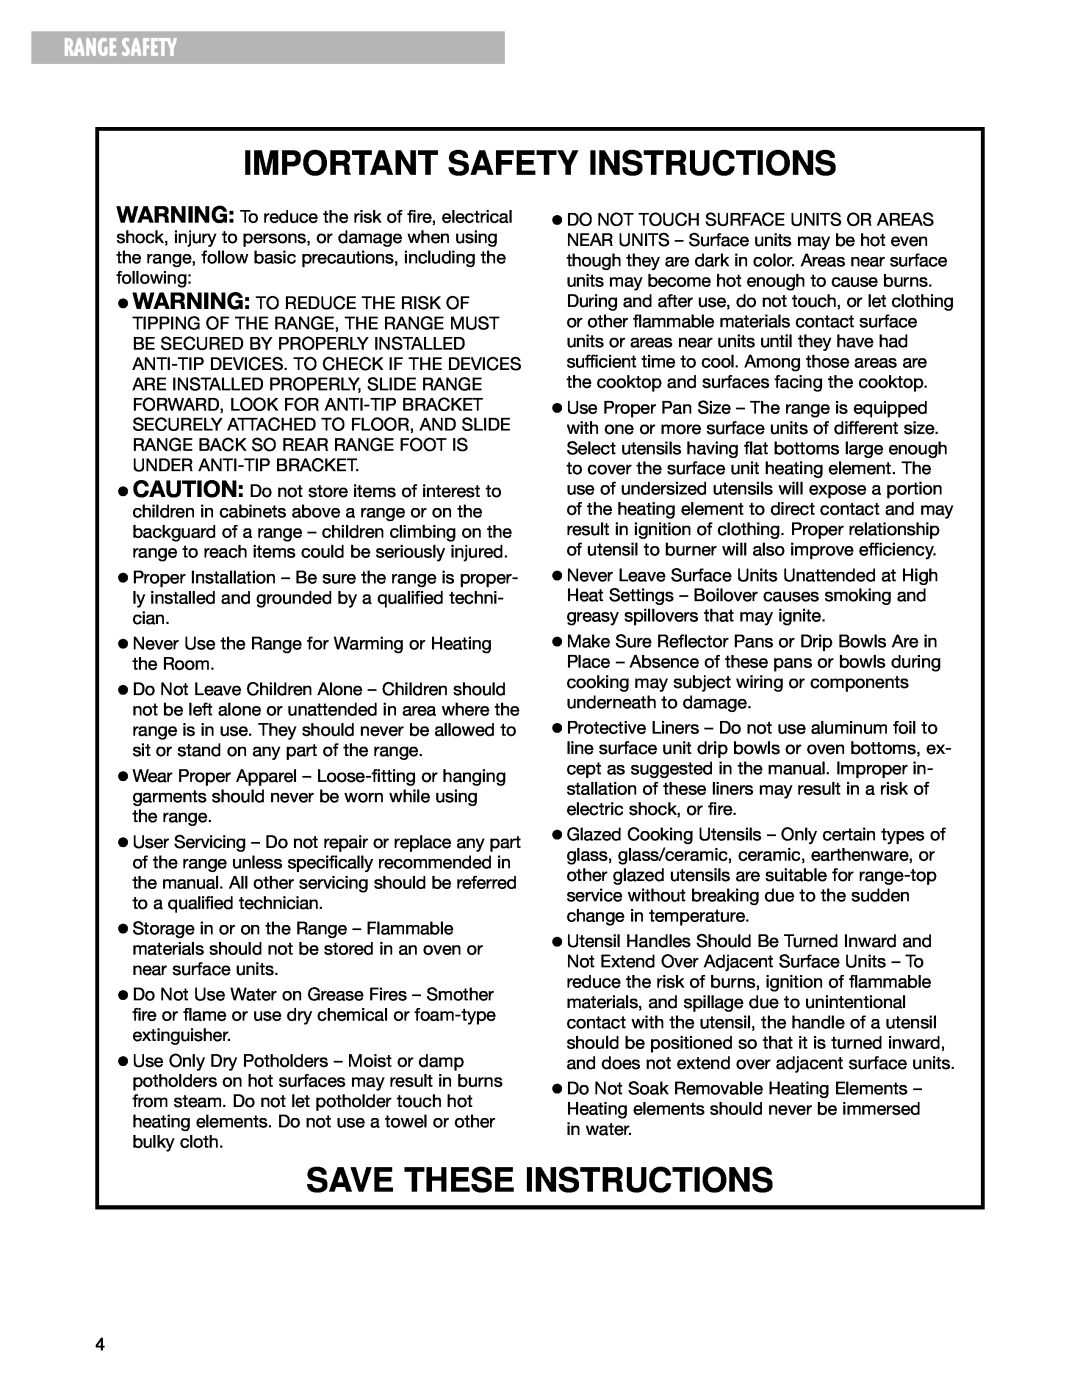 Whirlpool RF199LXH warranty Important Safety Instructions, Save These Instructions, Range Safety 